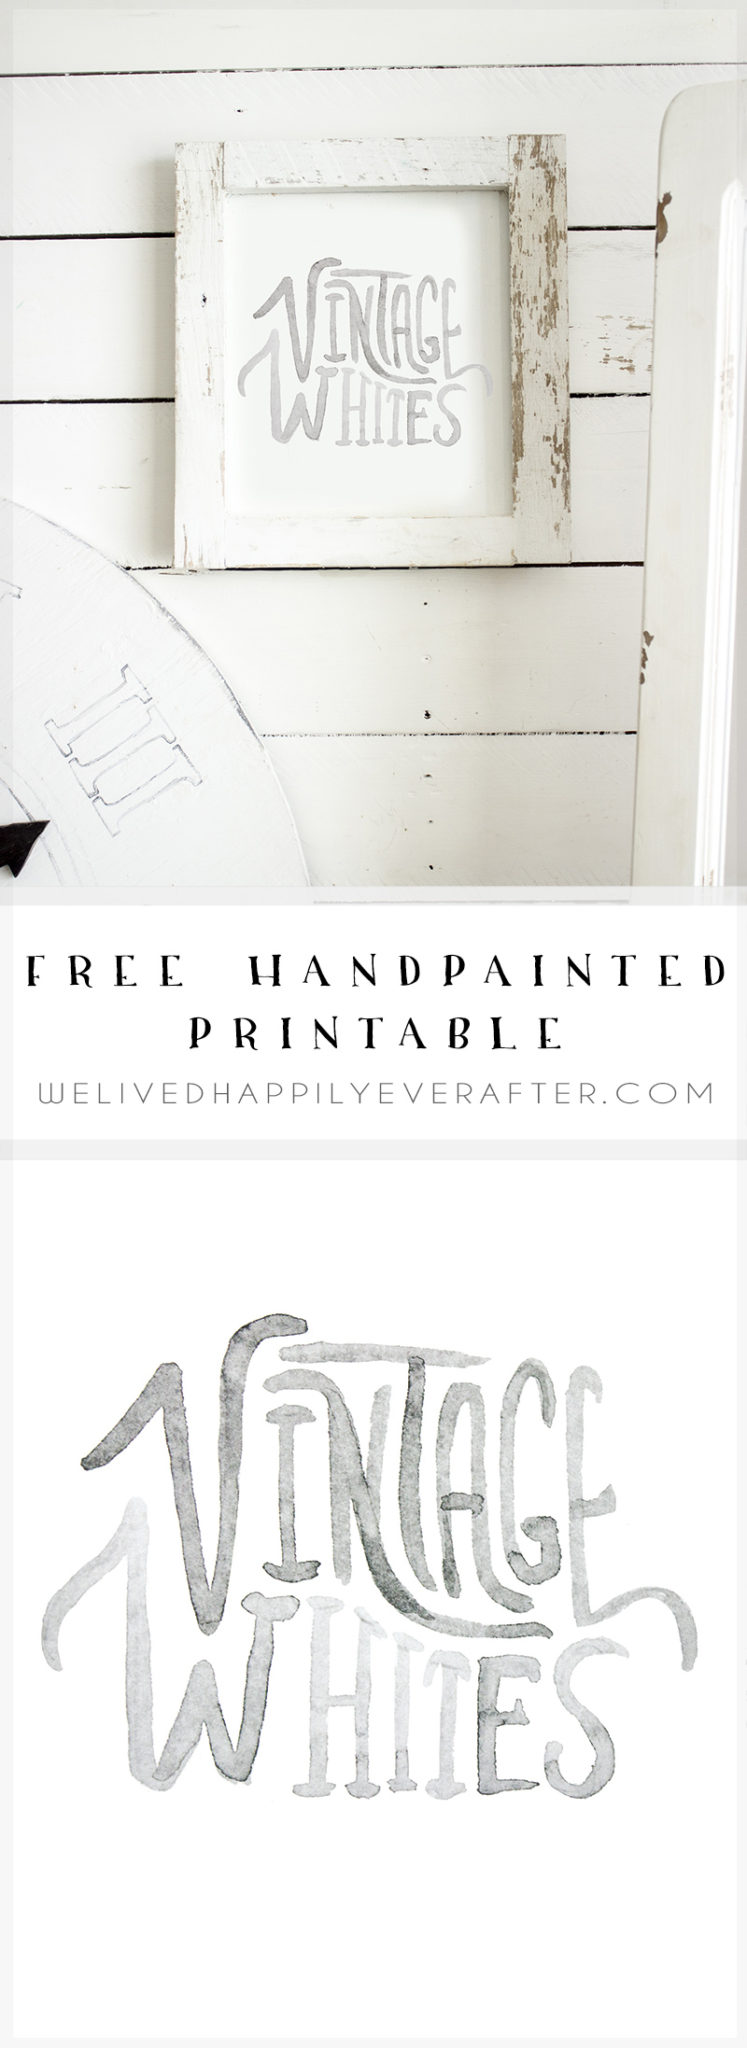 Vintage Whites Watercolor Laundry Room Printable